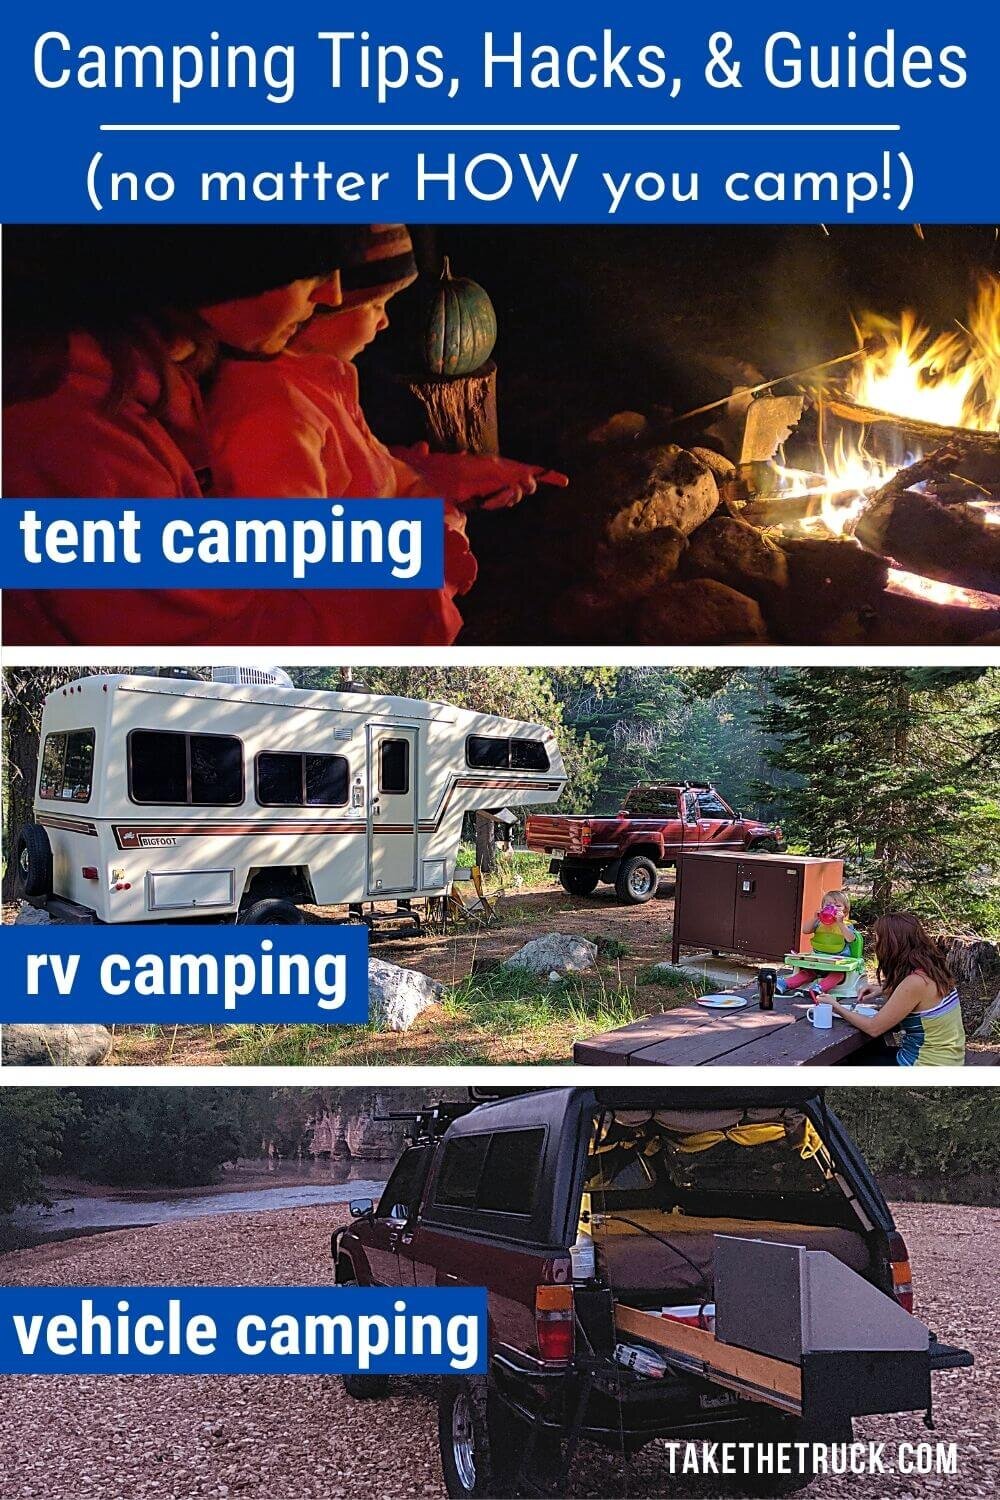 Whether you camp in a truck, tent, car, van, popup camper, travel trailer, or RV, this page has great posts on camping topics that can improve your camping game! Camping ideas for everyone!